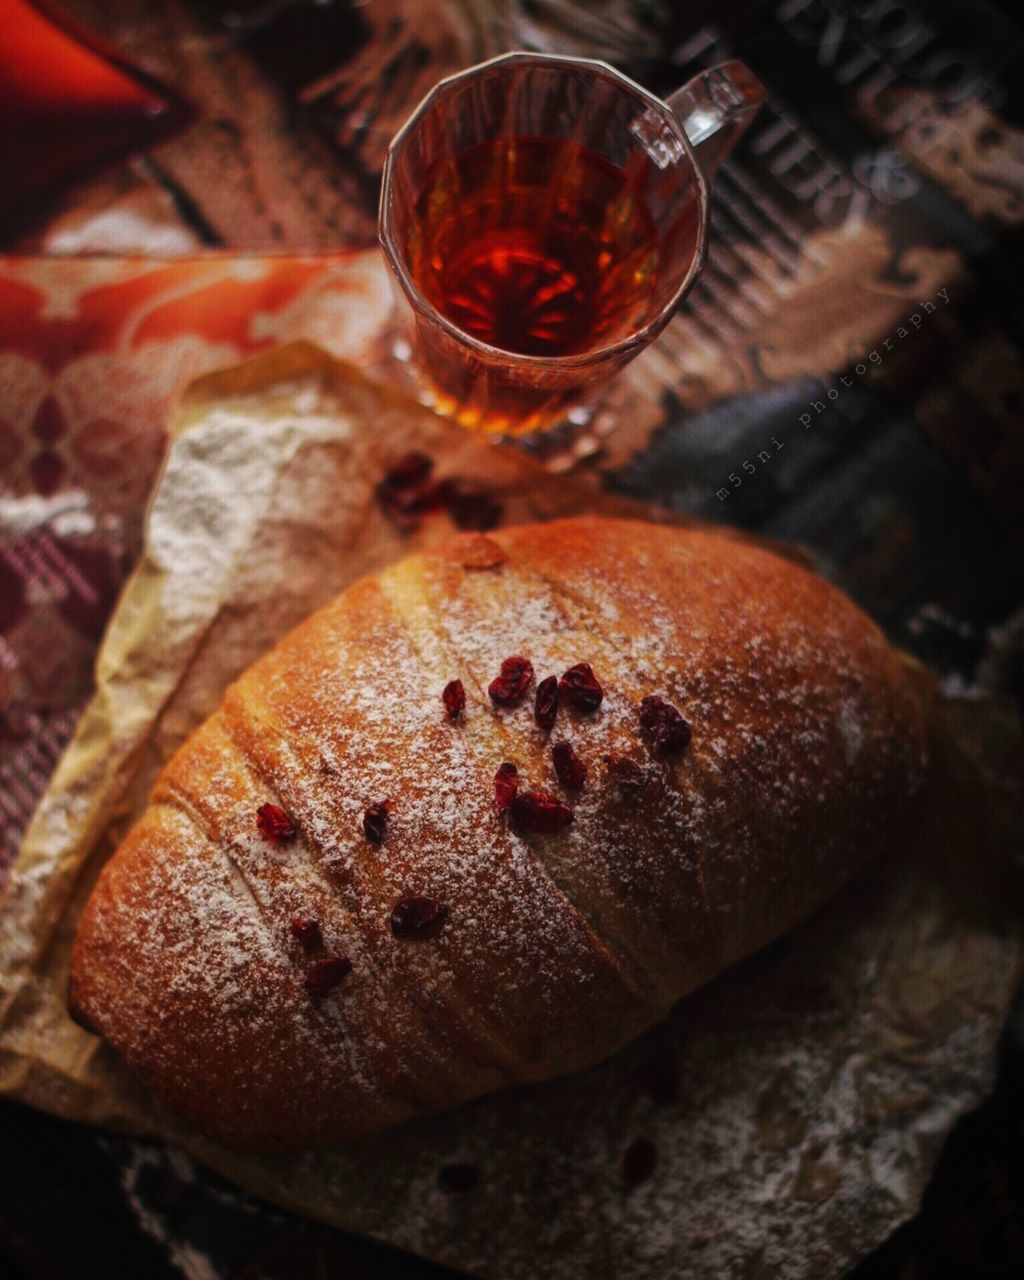 food and drink, food, bread, freshness, fast food, refreshment, drink, alcohol, glass, no people, indoors, baked, wine, healthy eating, rustic, fruit, still life, household equipment, close-up, loaf of bread, high angle view, dessert, drinking glass, dark, meal, studio shot, table, wine glass